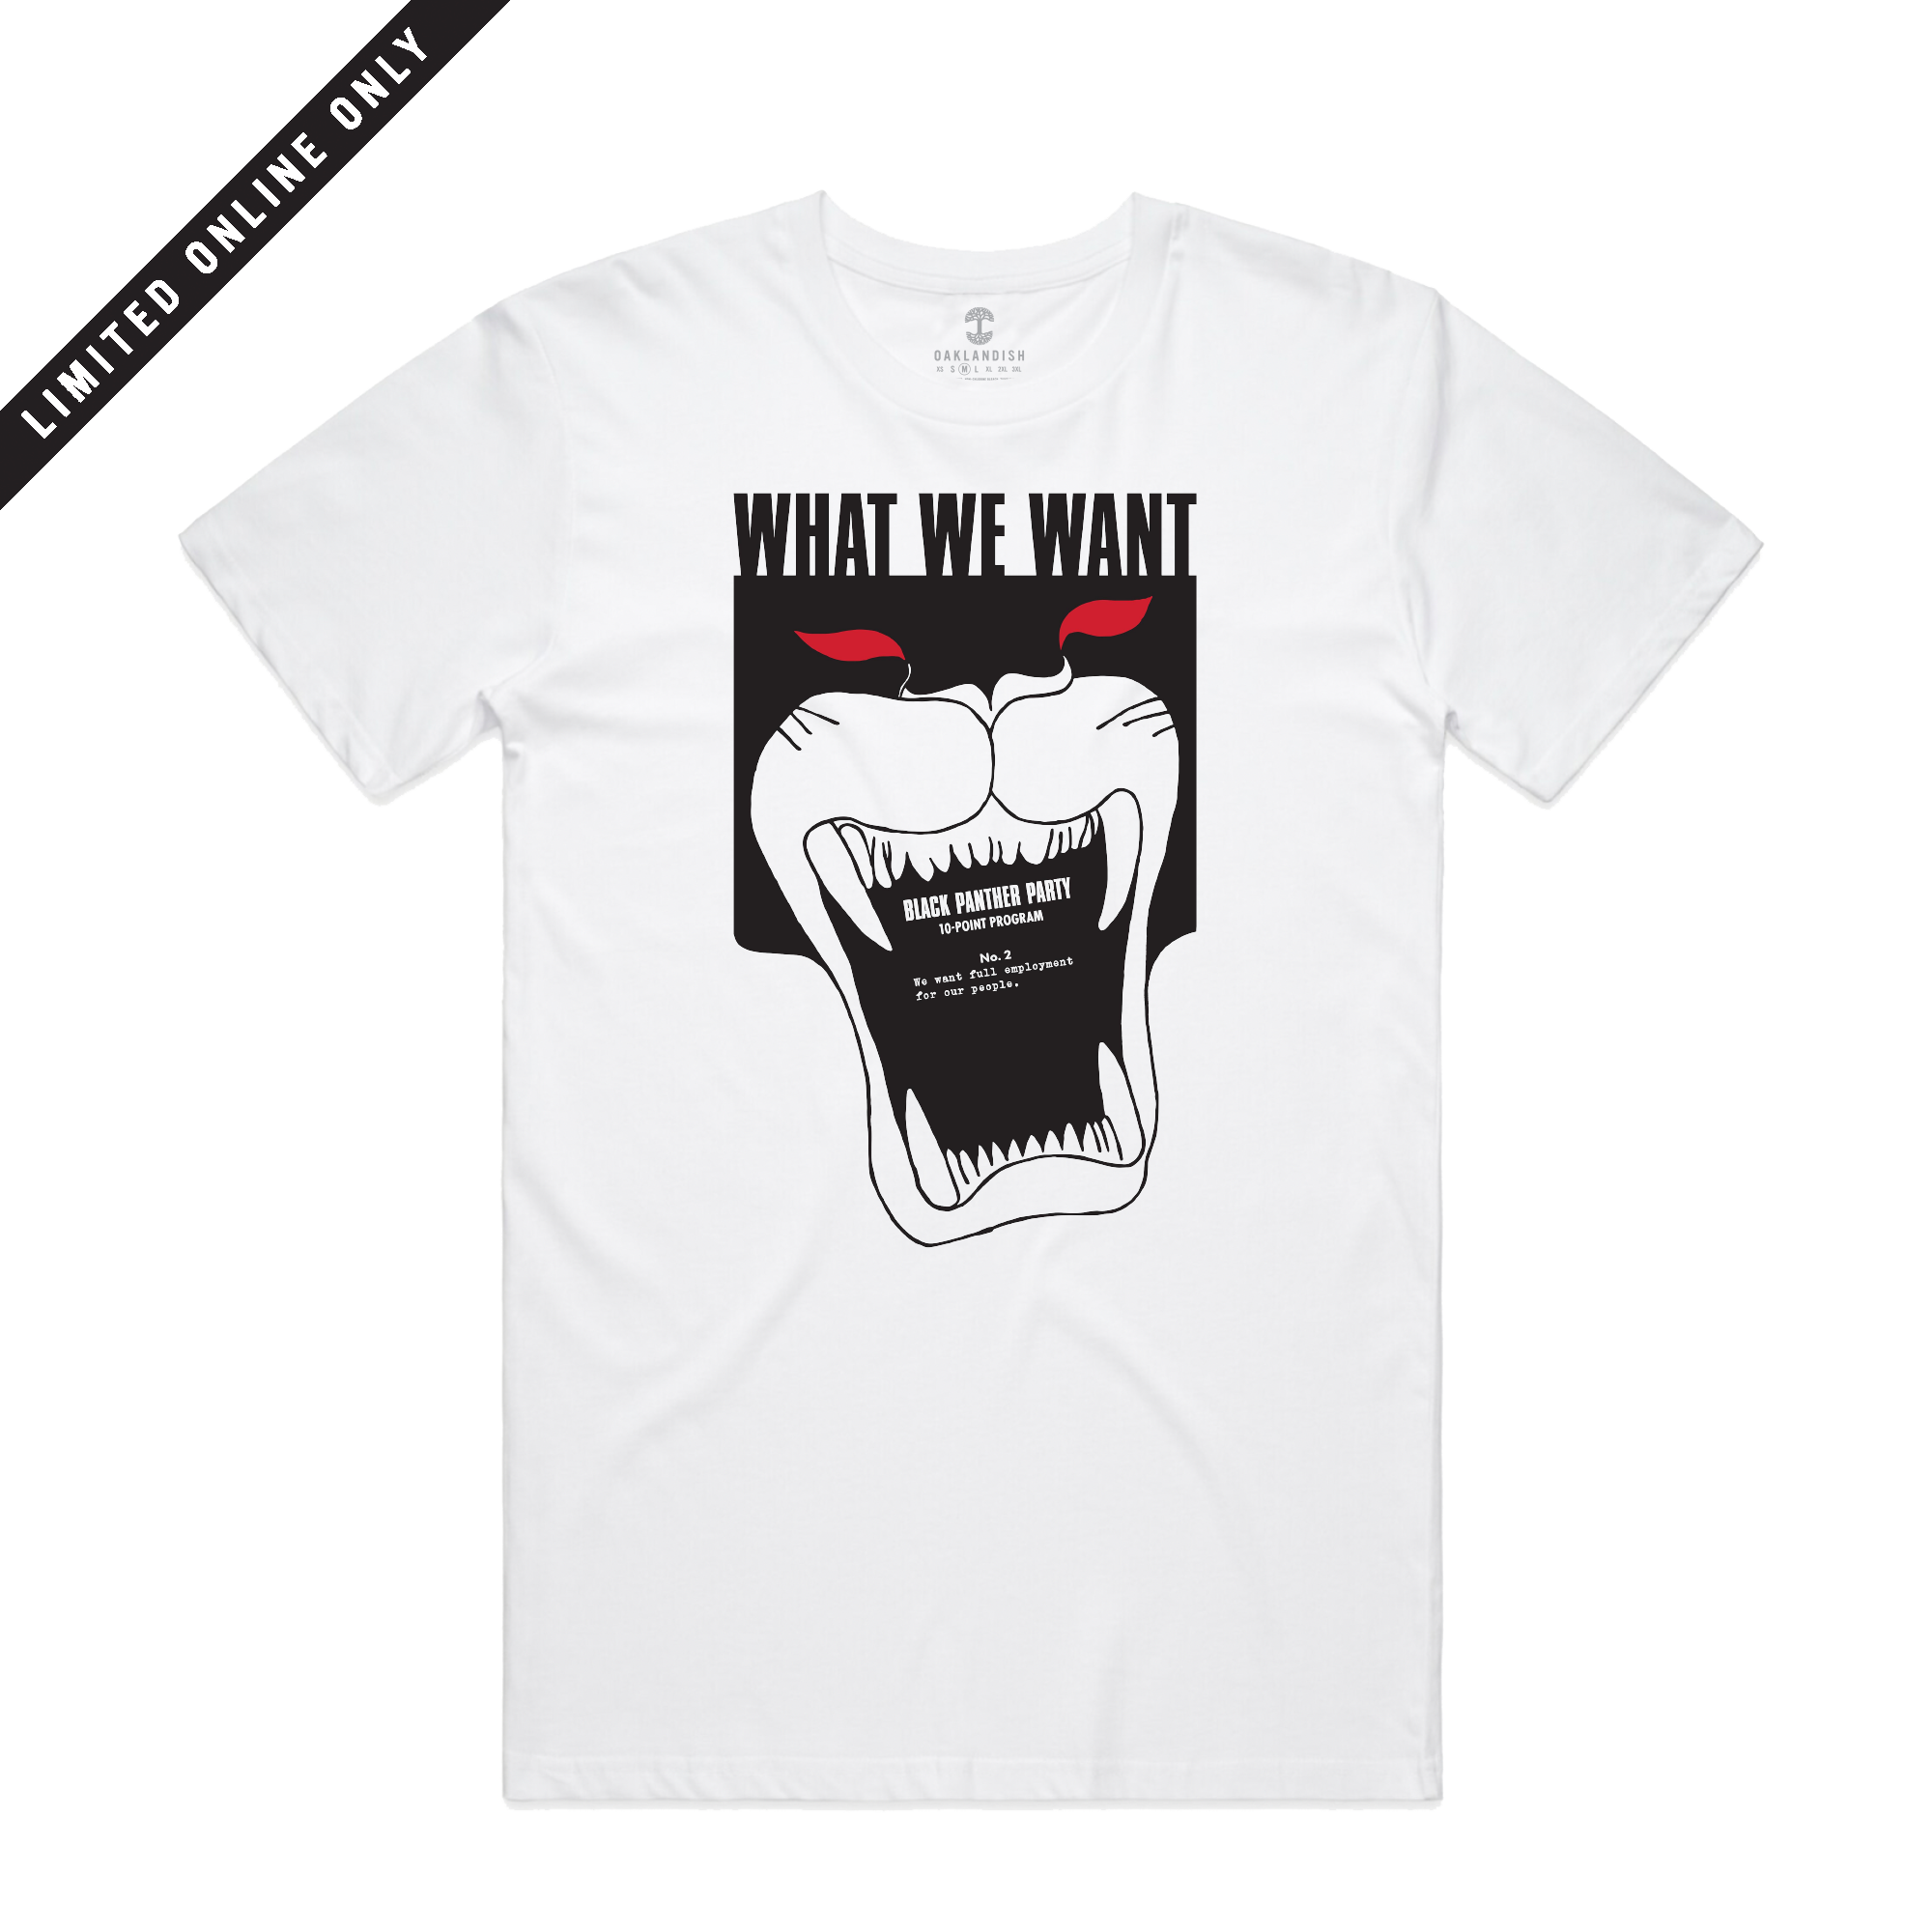 Front view of white cotton tee with image of a What Want : 10 Point Platform # 2